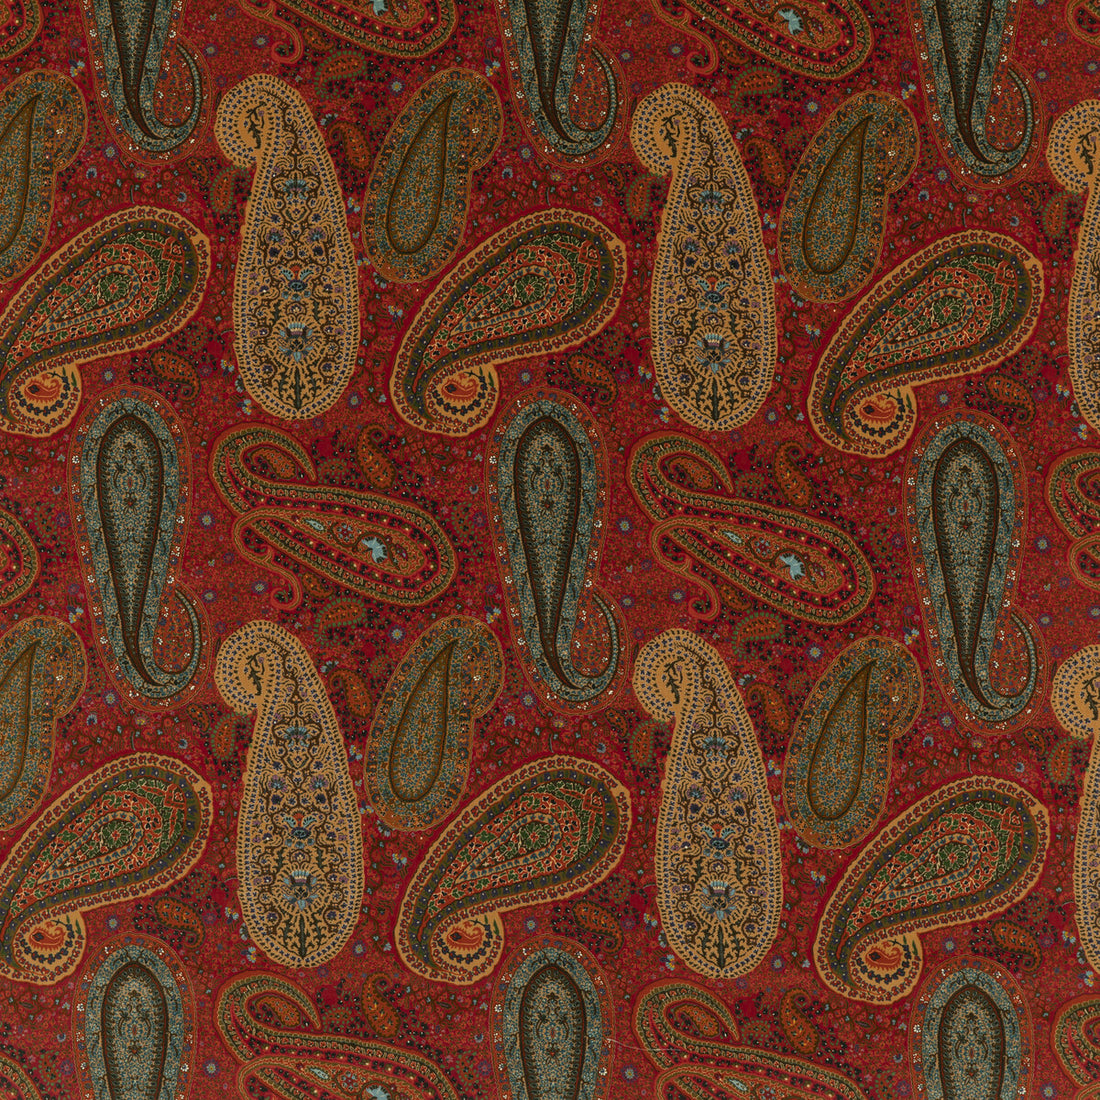 Peregrine Paisley Velvet fabric in teal/red color - pattern FD2002.R52.0 - by Mulberry in the Mulberry Long Weekend collection